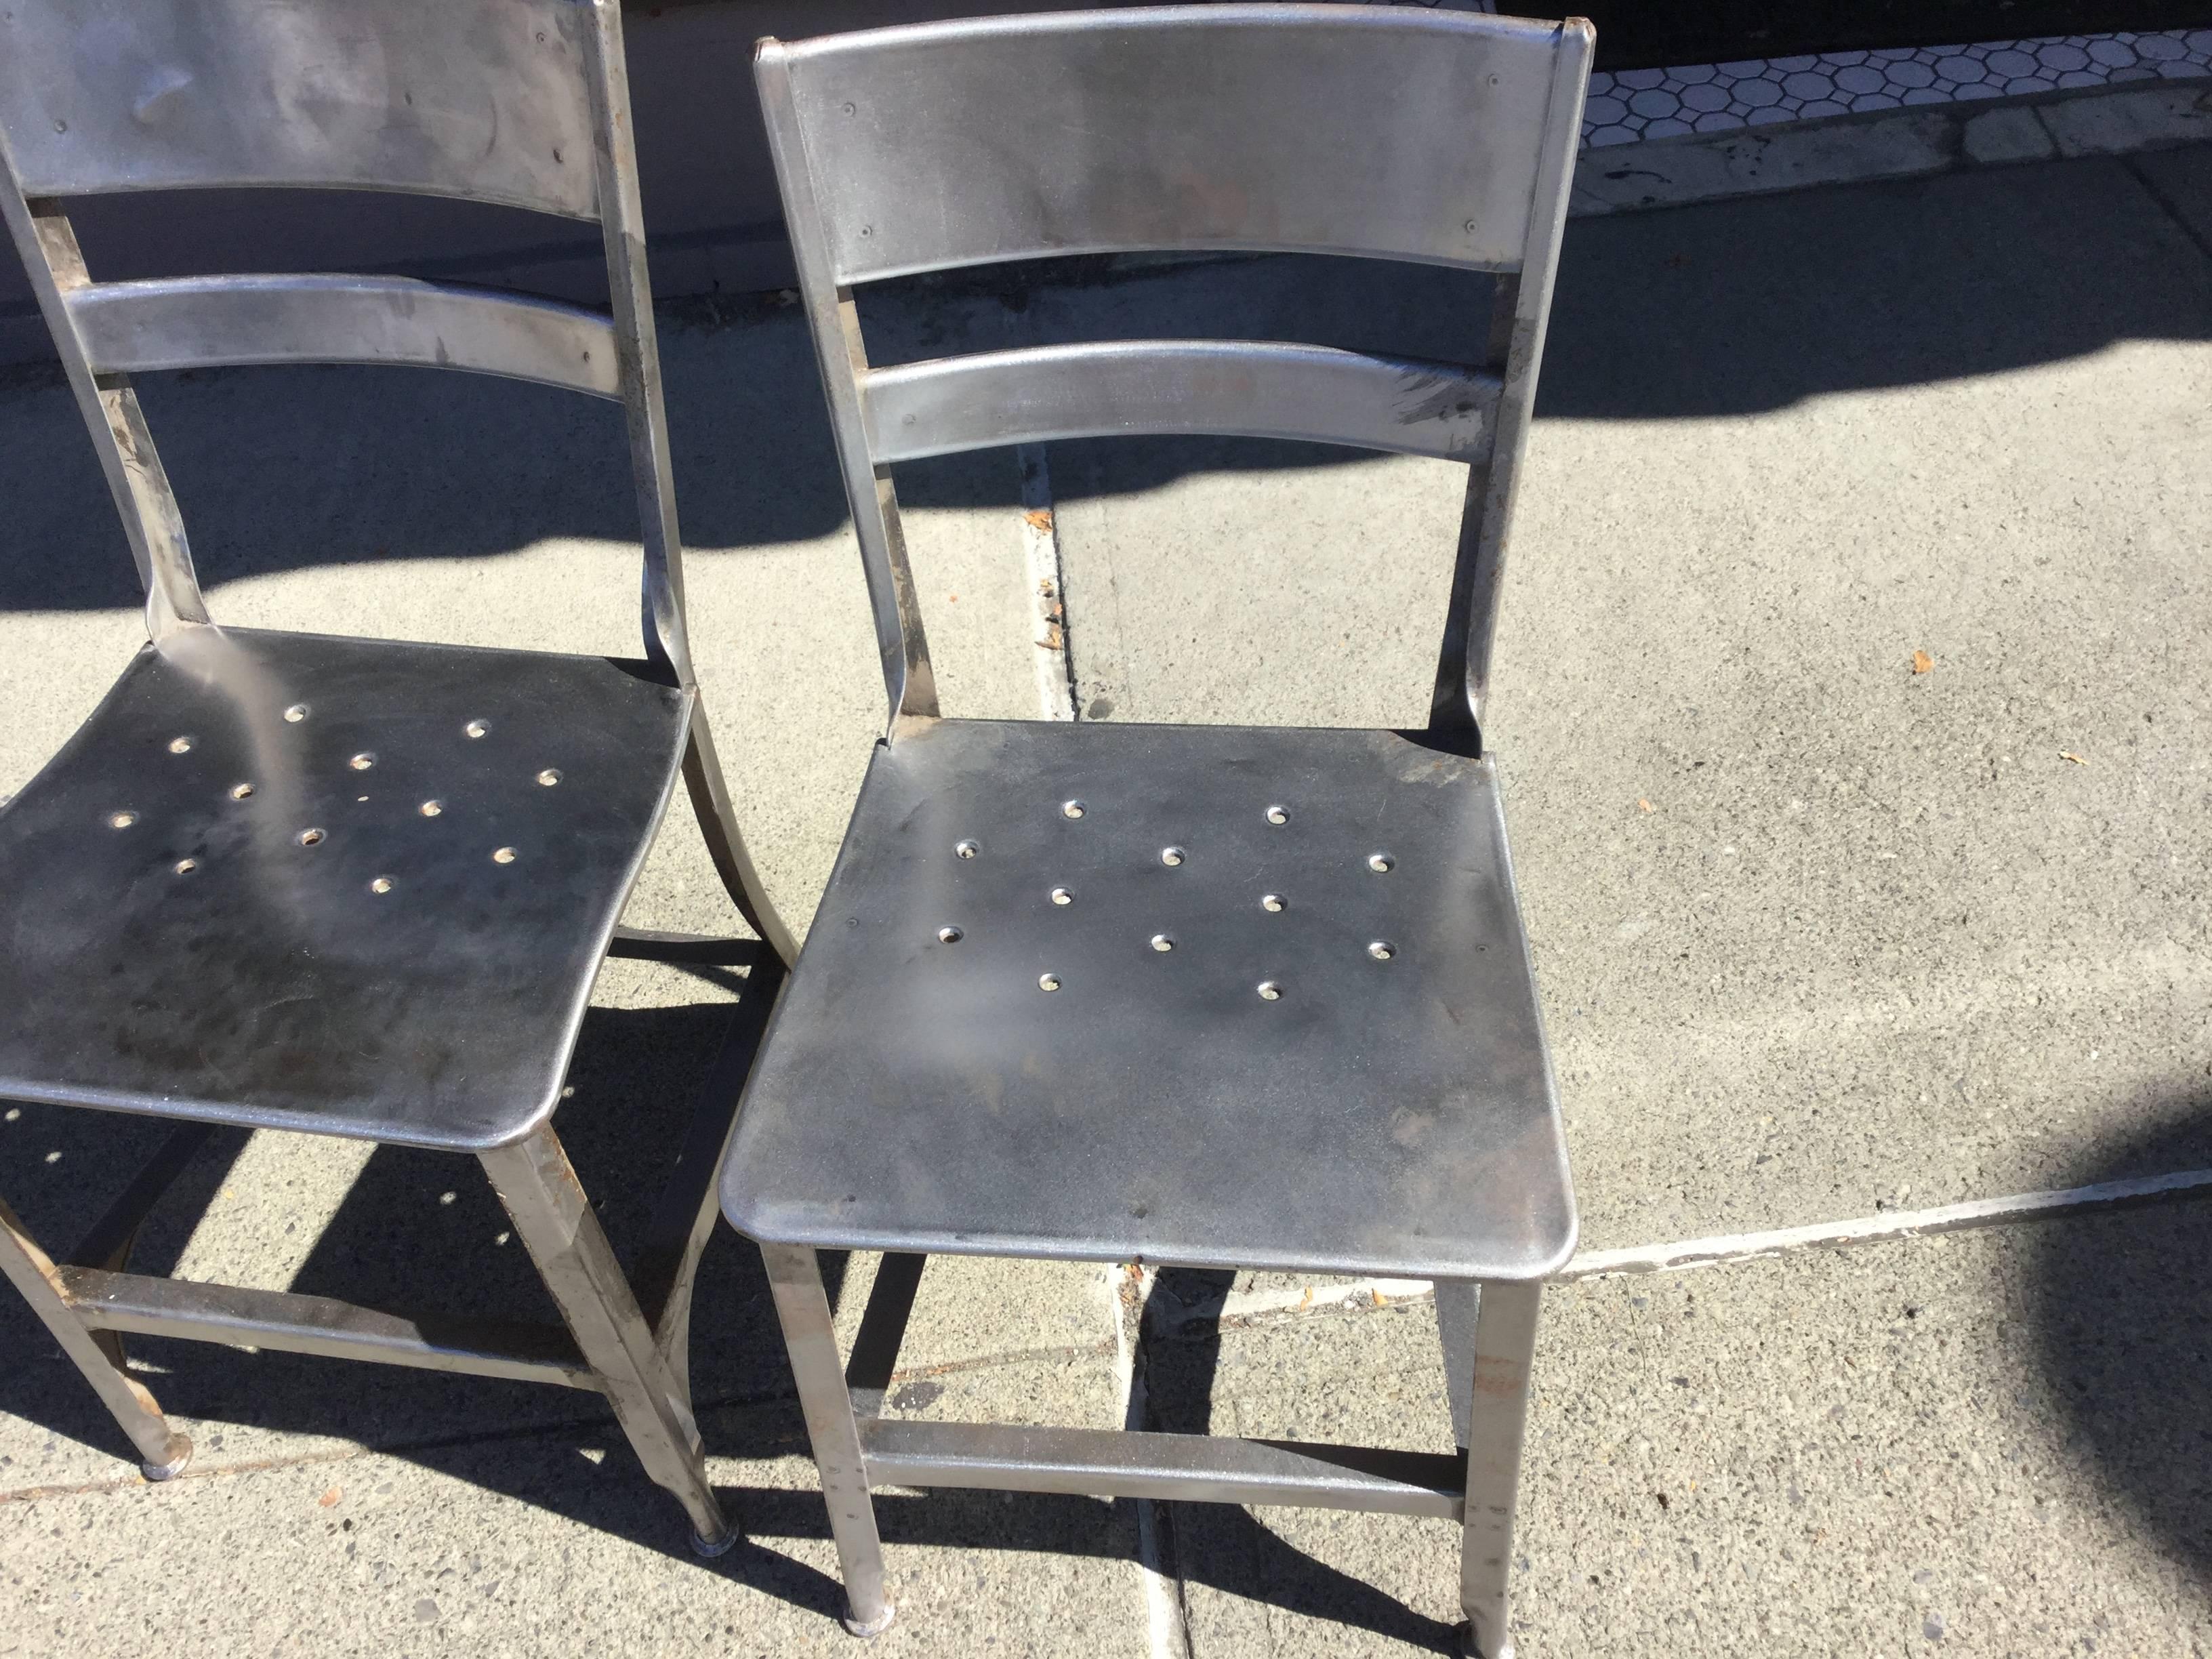 20 steel Toledo chairs. You can buy one or all. These chairs have a great Industrial look. They were originally painted and have been stripped down to the natural steel and have a clear coat of poly urethane applied to prevent rust. I can get more